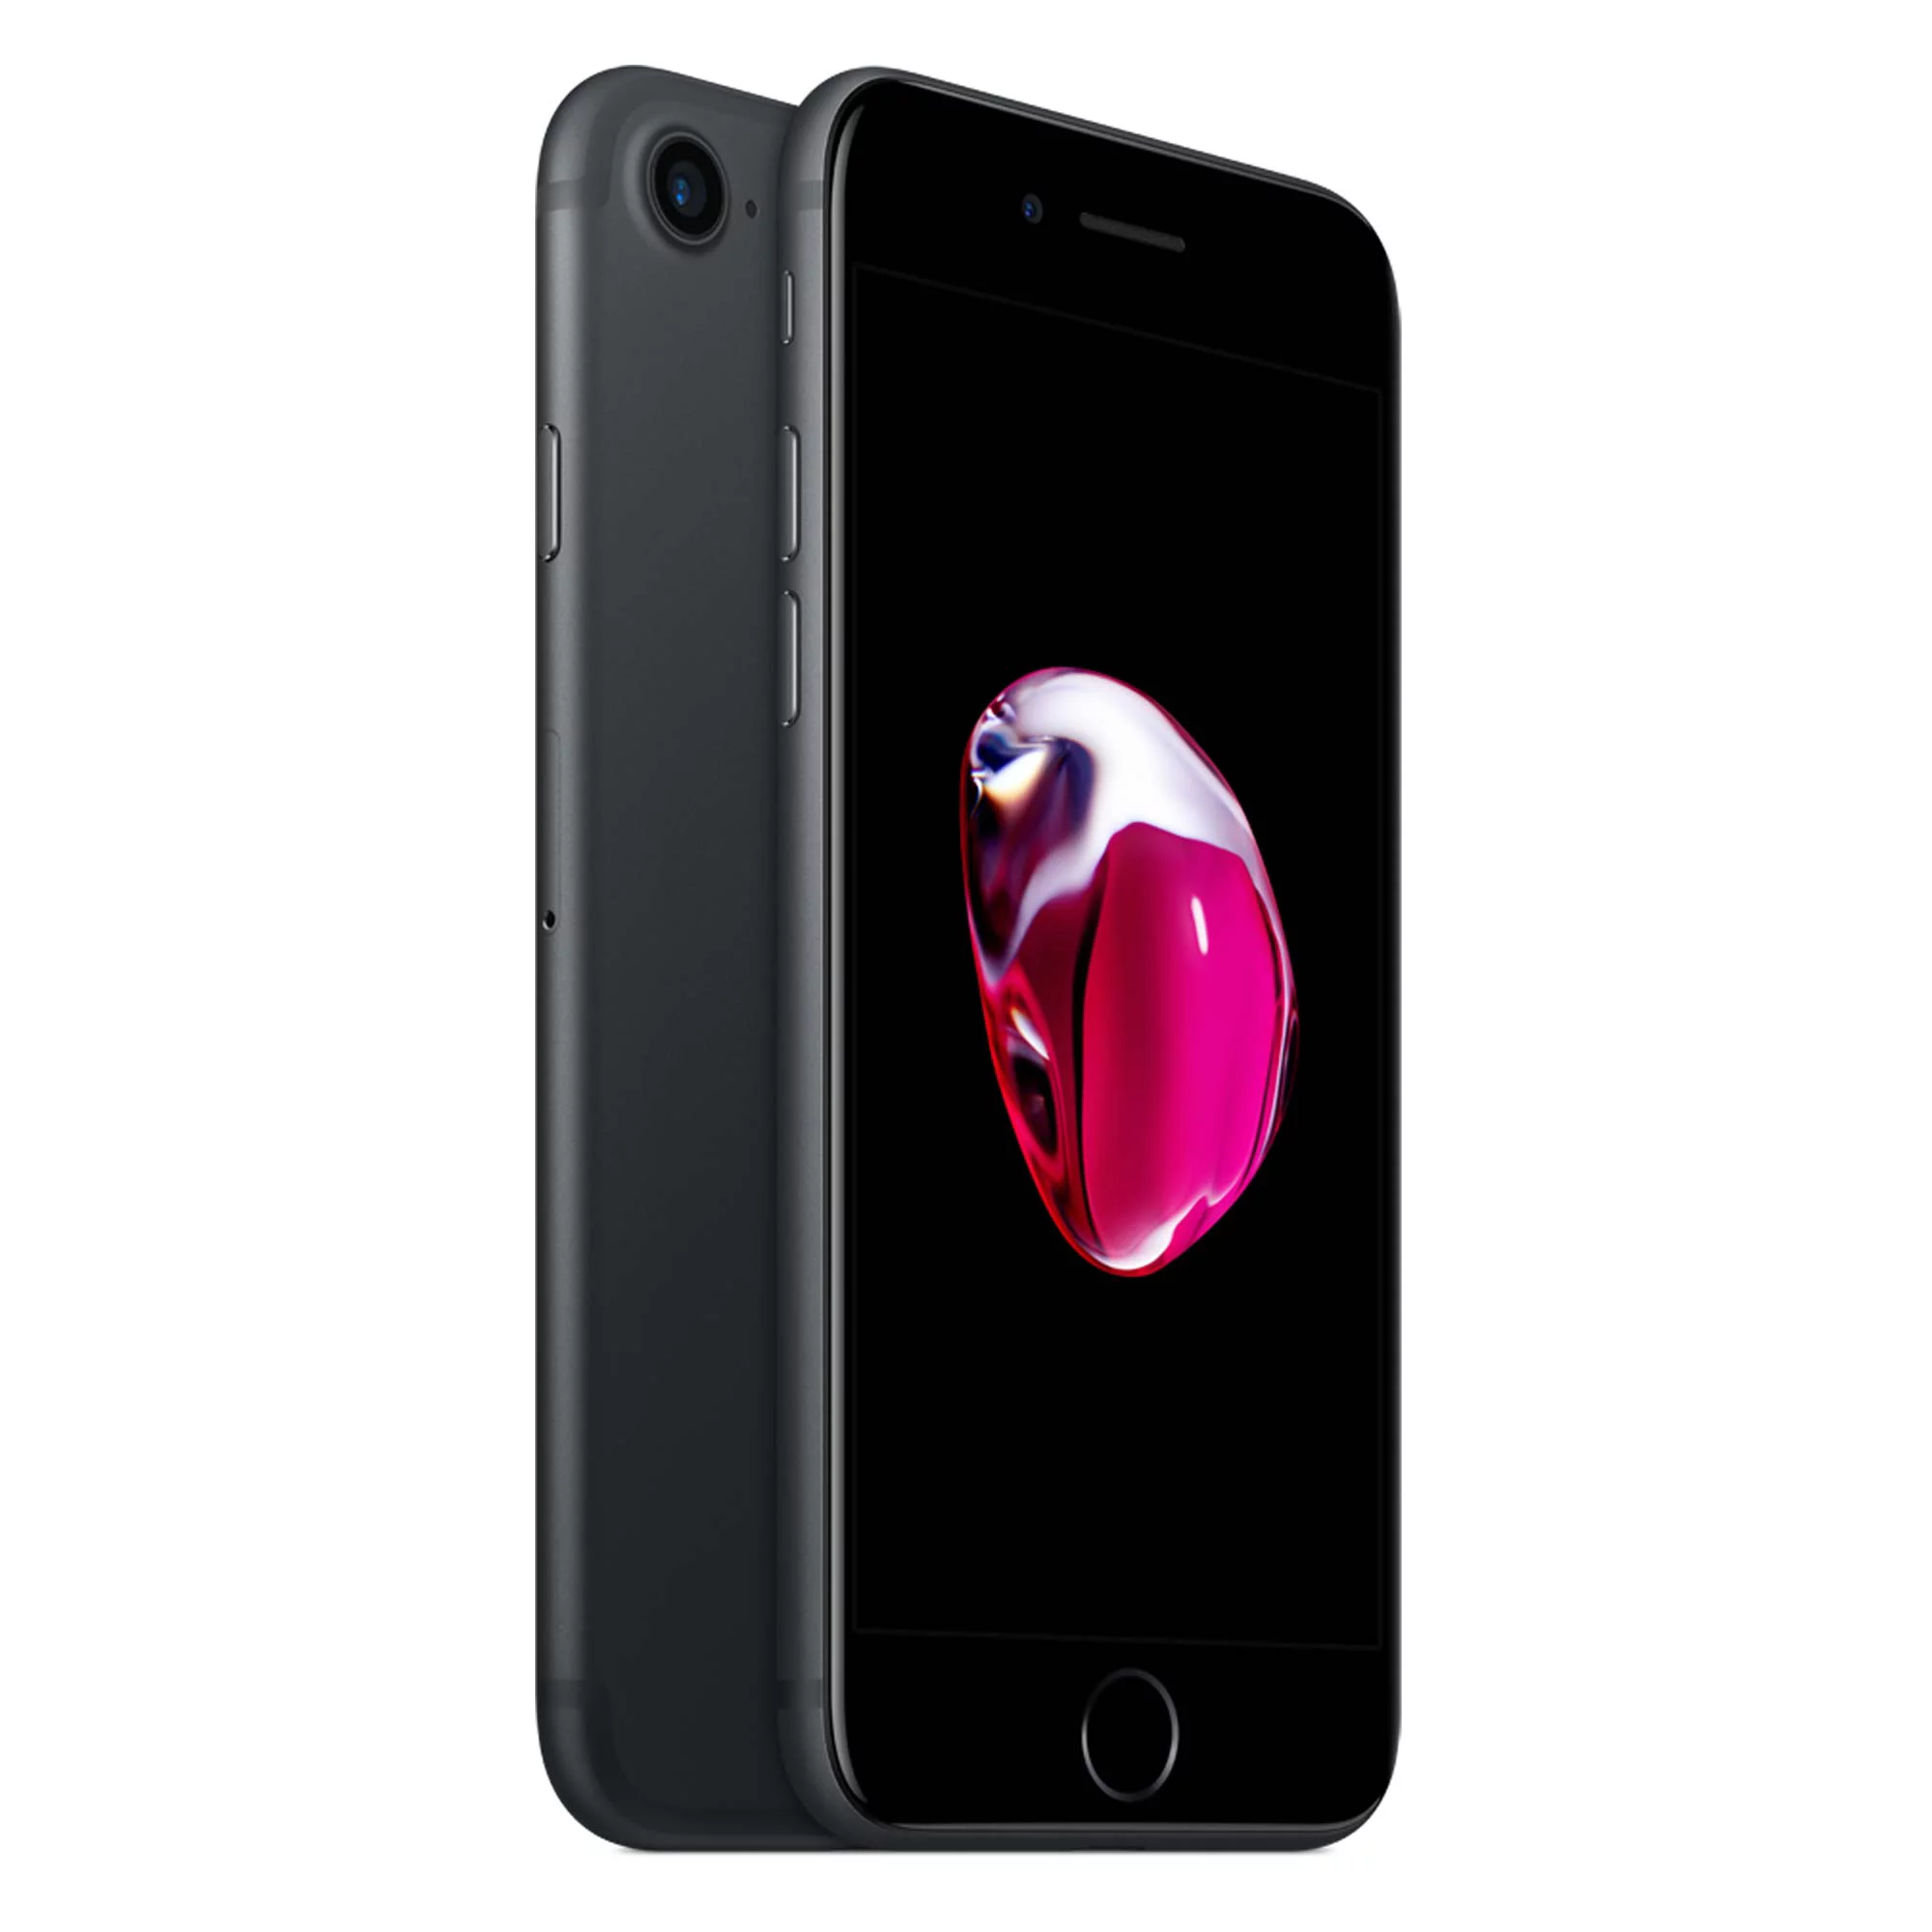 Apple iPhone 7 (AT&T)